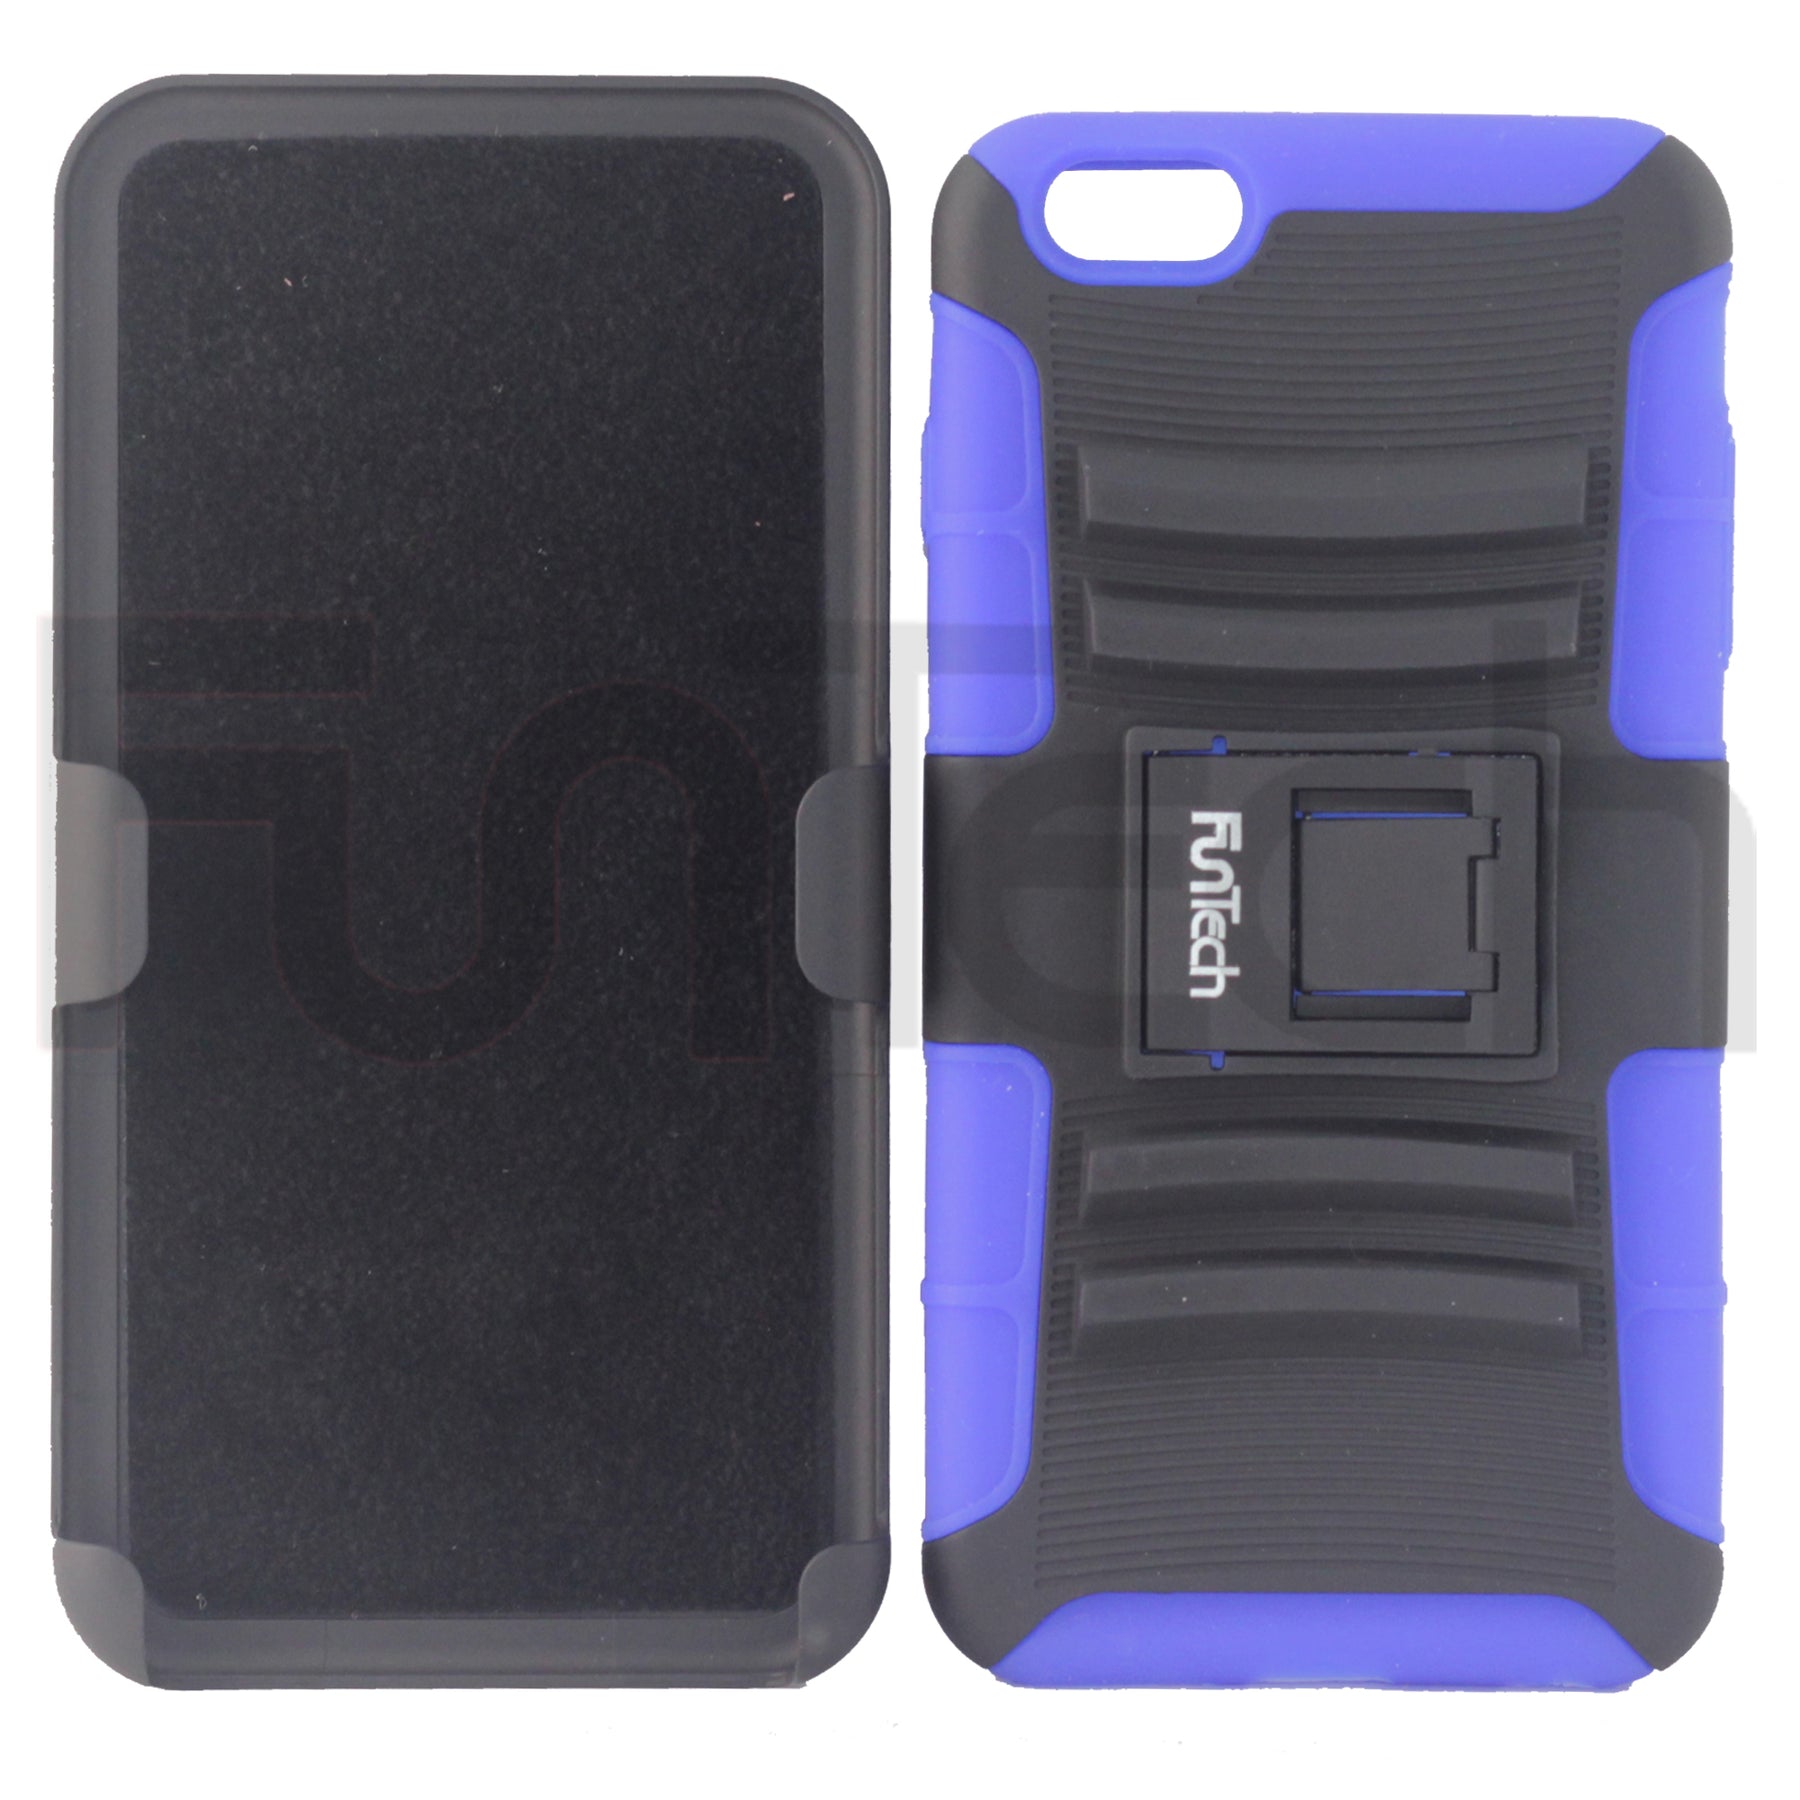 Apple, iPhone 6/6S, 5.5"Rugged Shockproofl Case with Beltclip, Color Black/Blue.